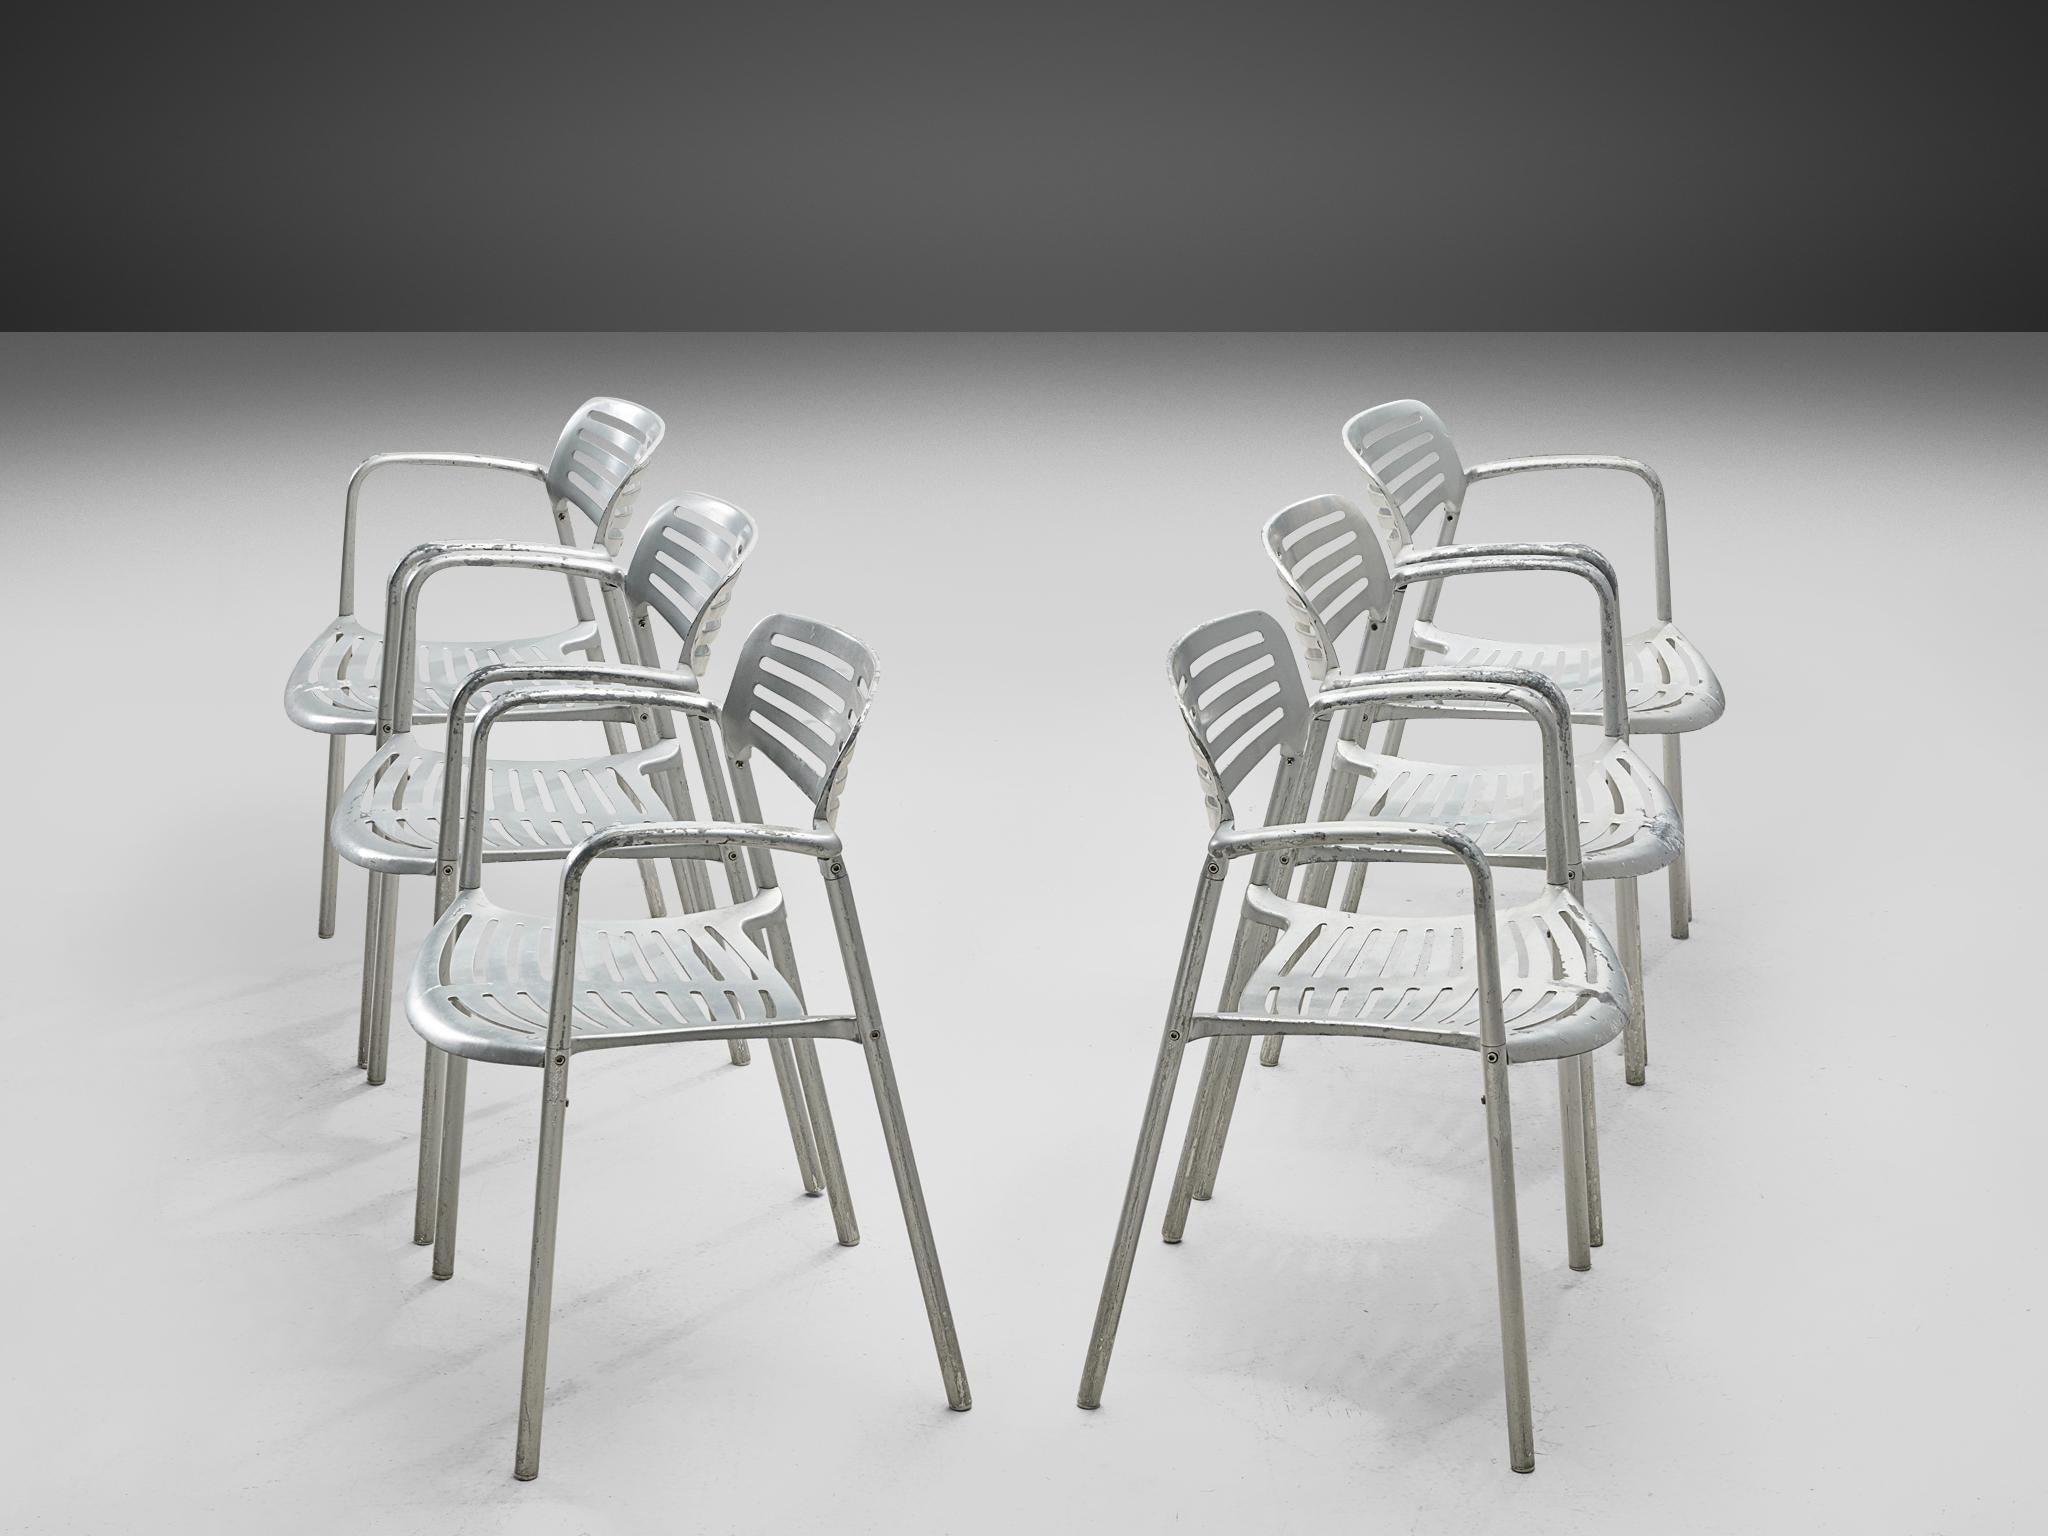 Jorge Pensi, armchairs, aluminum, Spain, 1988

A set of Jorge Spensi's aluminum chairs of the Toledo collection. Pensi designed the 'Toledo' chairs and the 'Toledo' table for the manufacturer Amat-3. Later the designs were adopted by Knoll